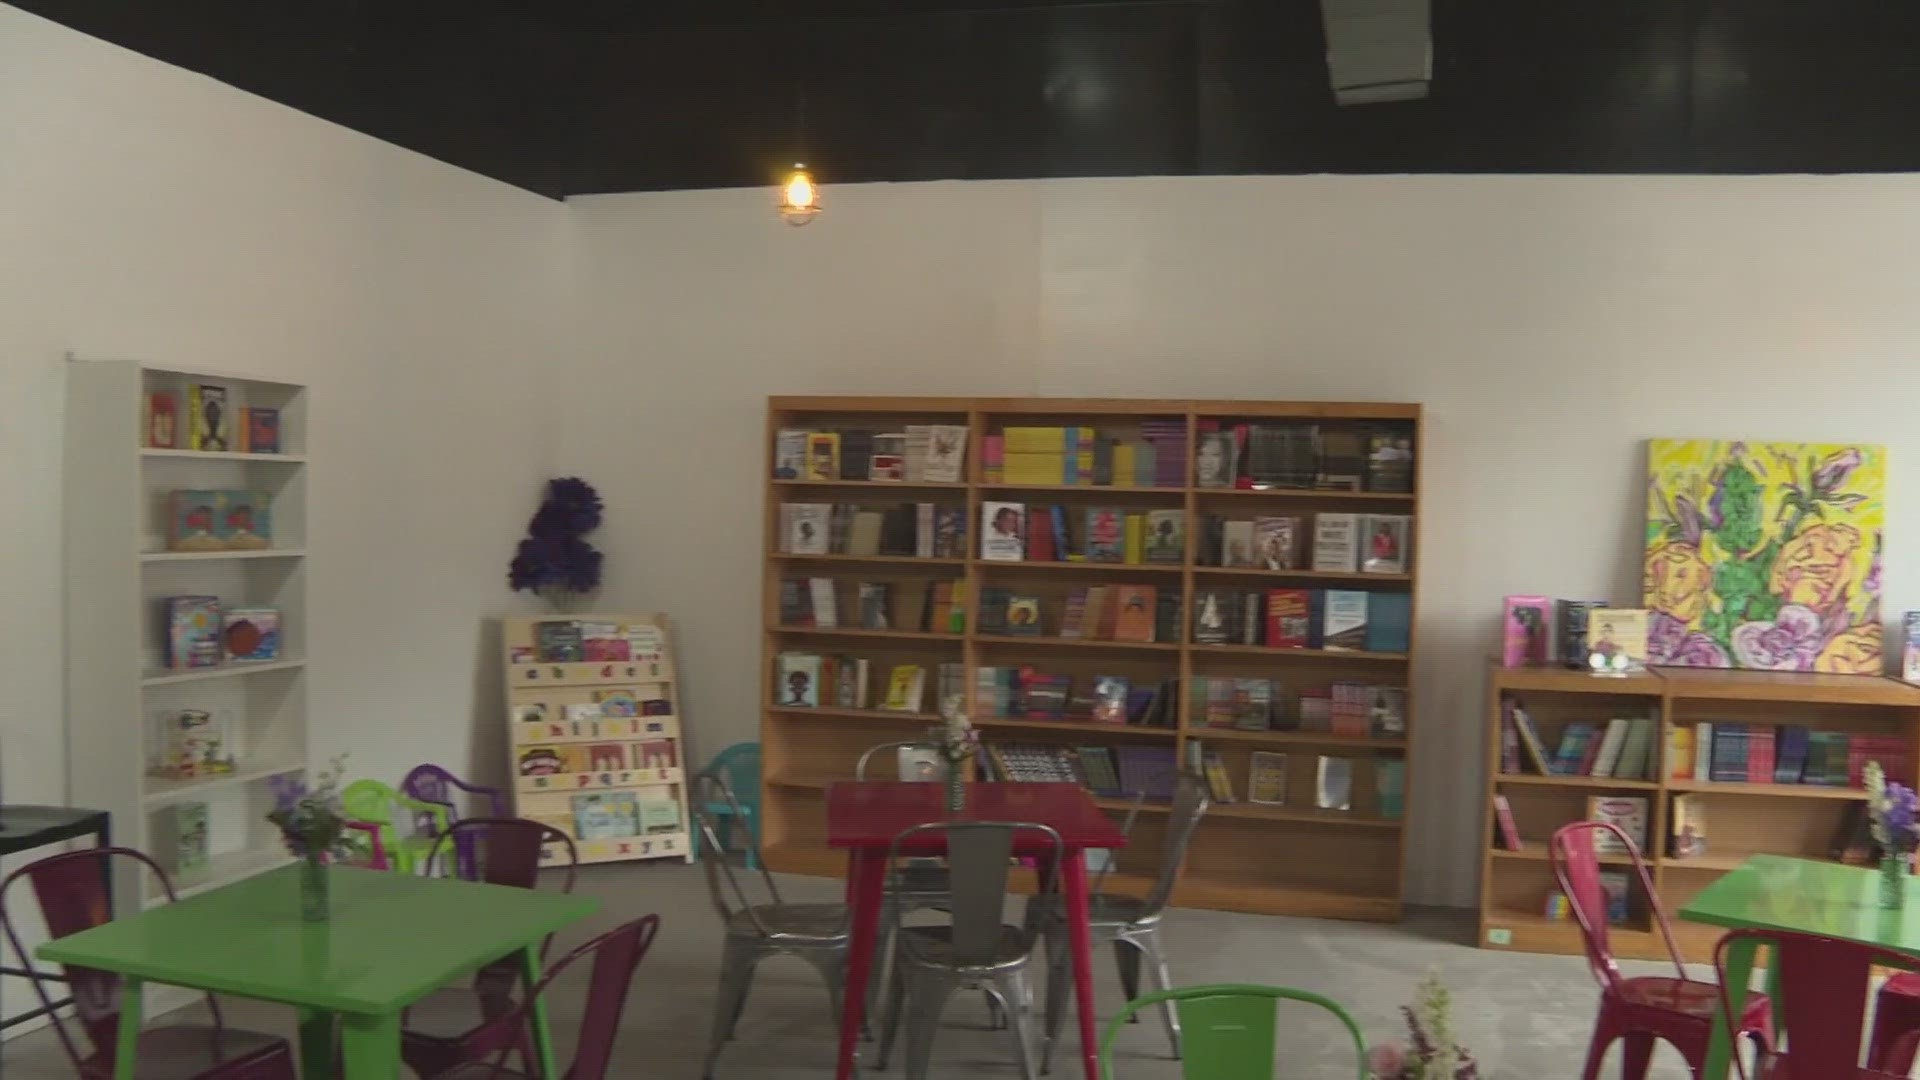 Florida House District 13 representative Angie Nixon is behind 'The Cafe Resistance Bookstore,' which she is opening in response to state laws on education.